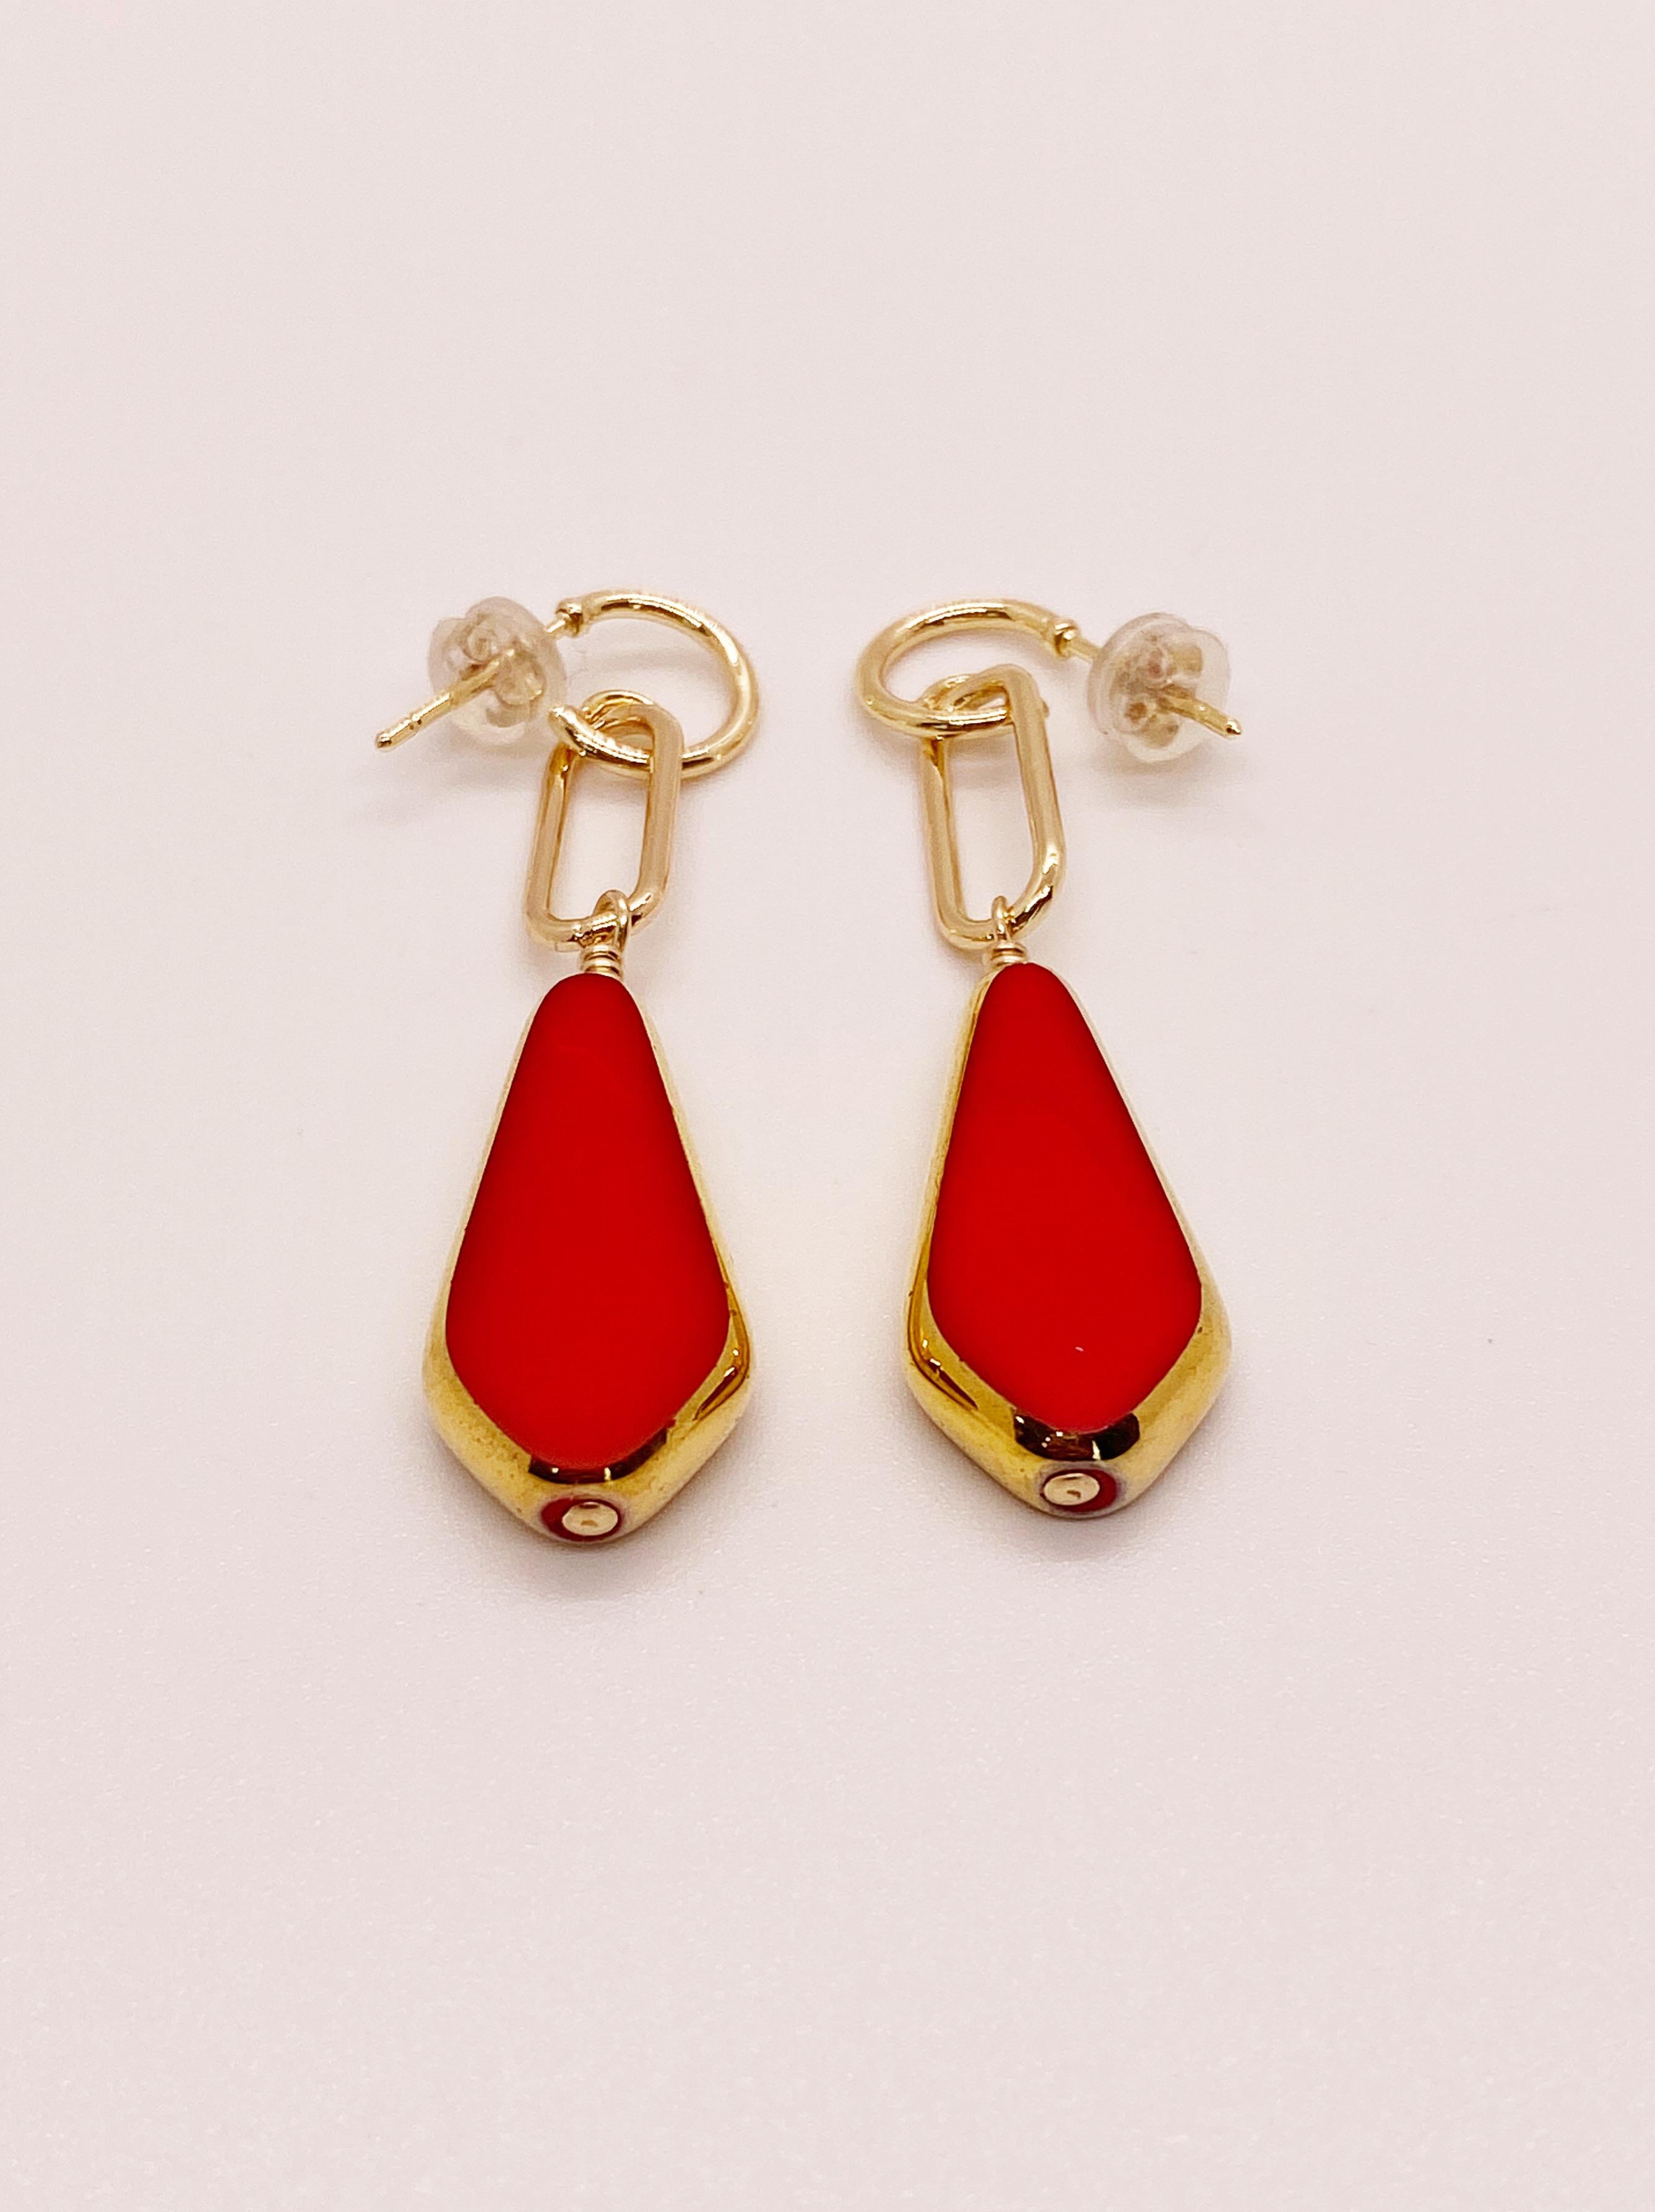 Red German vintage glass beads edged with 24K gold dangles on a 14K gold filled ear finding. 

The German vintage glass beads are considered rare and collectible, circa 1920s-1960s.